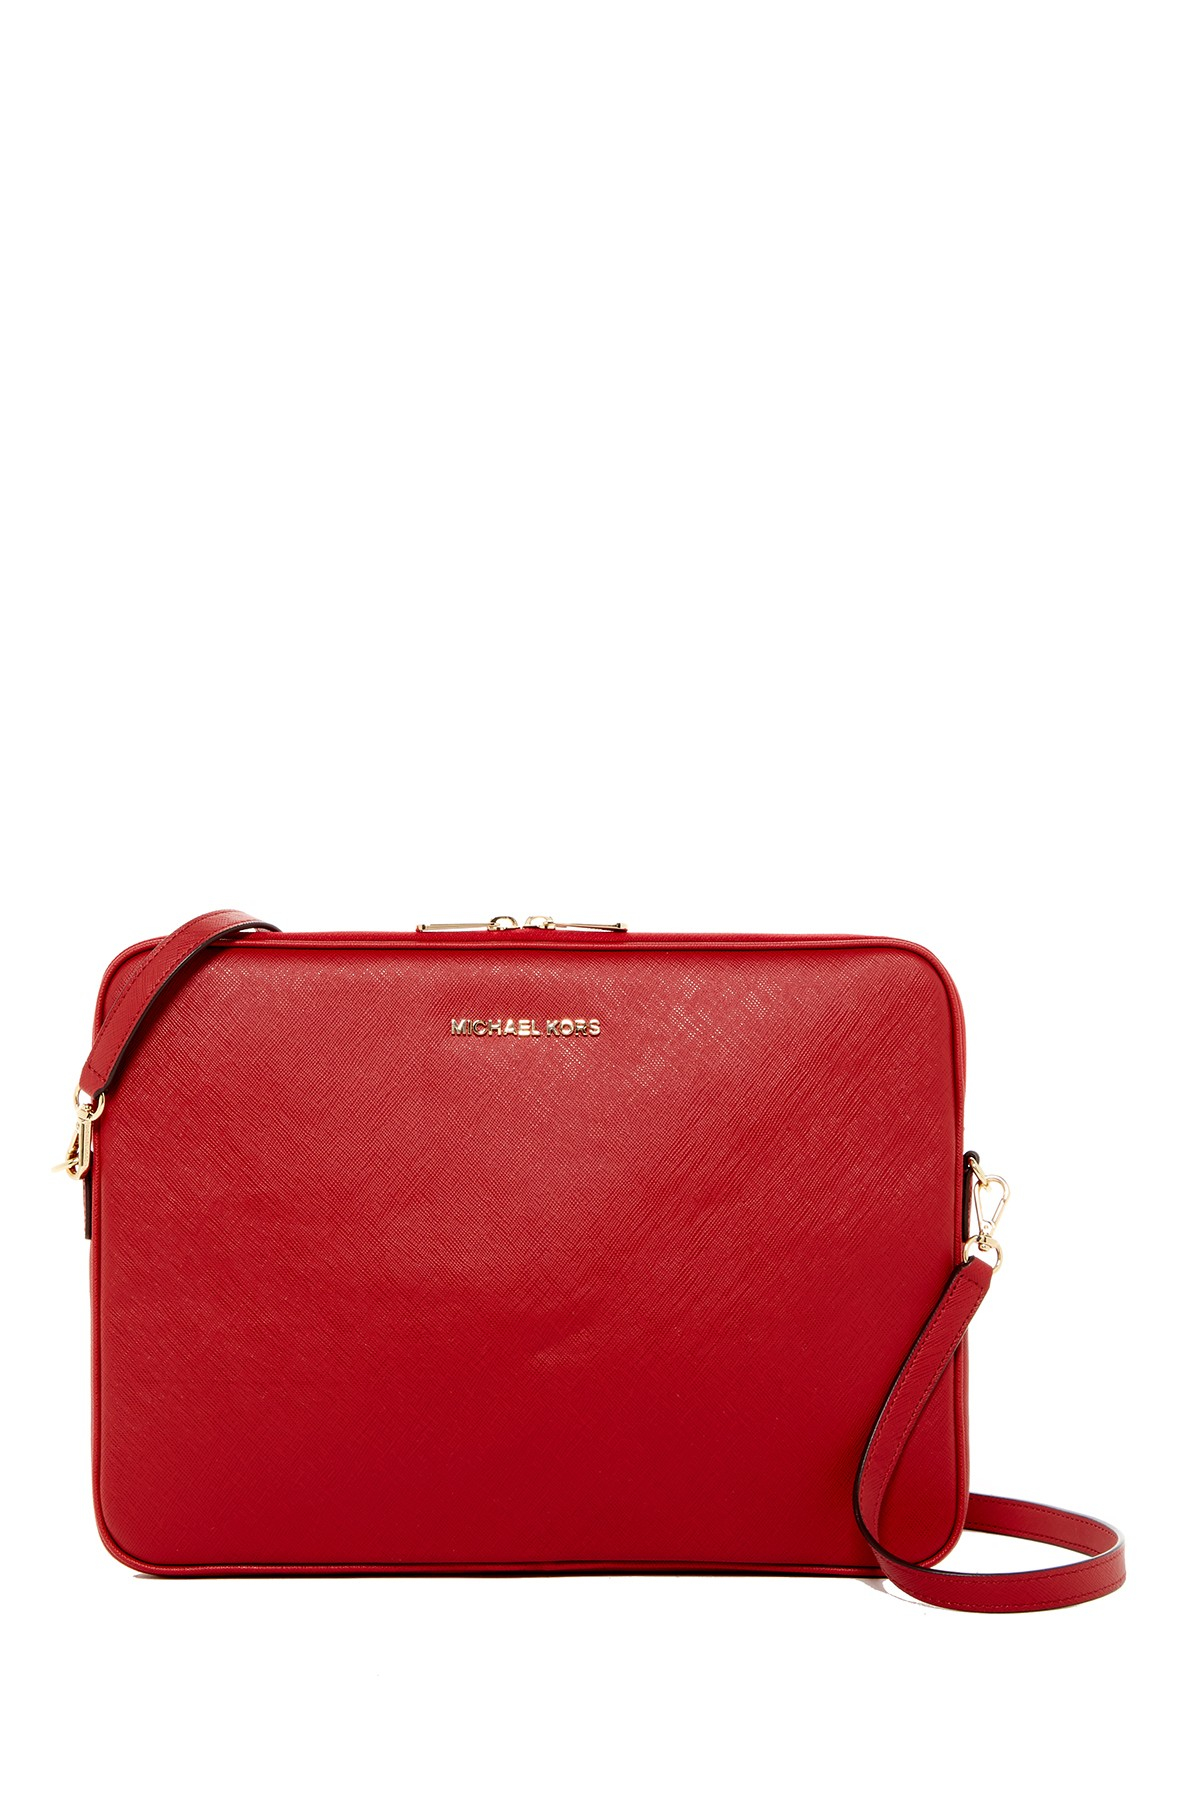 Michael Kors Pro 13" Laptop Sleeve in Red |